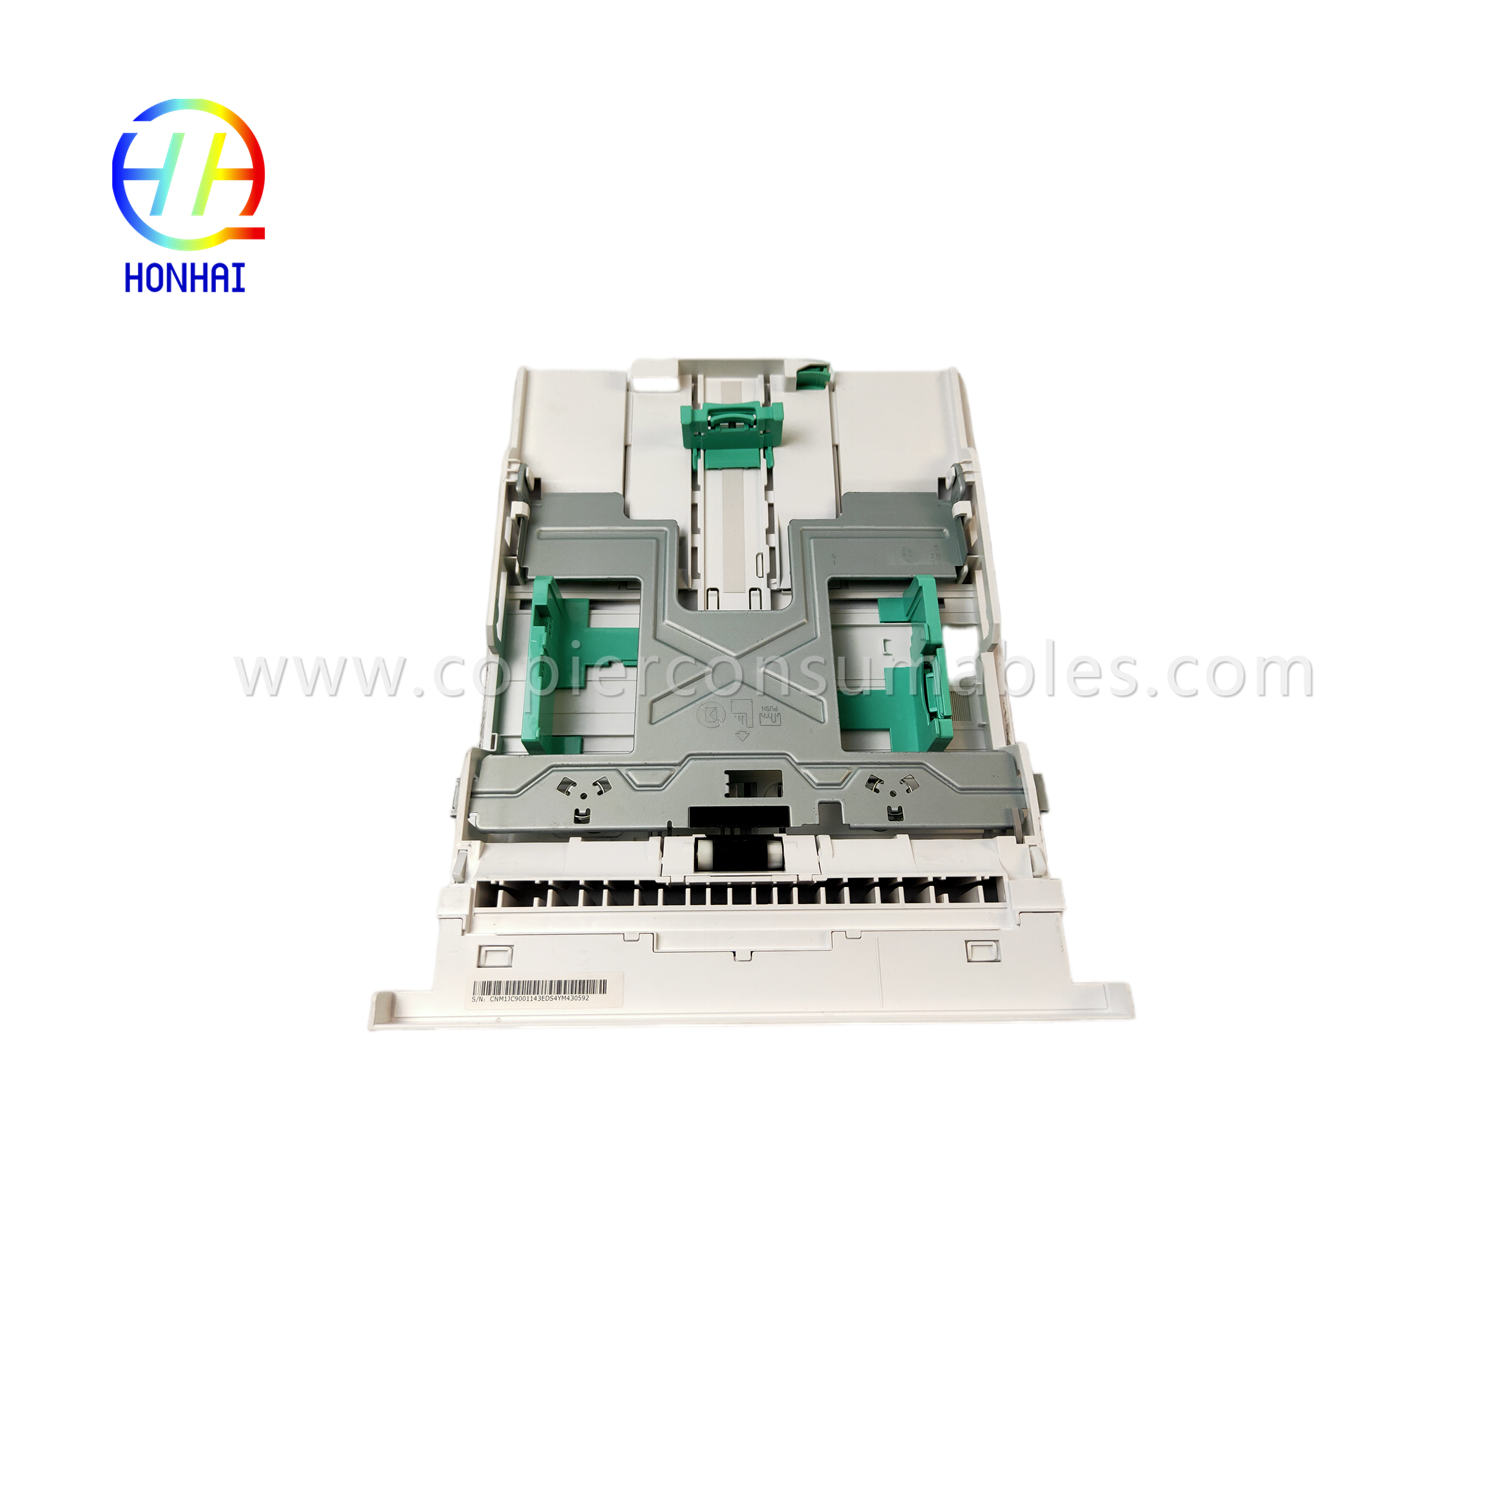 I-Paper Tray Assembly ye-Xerox Phaser 3320DNI WorkCentre 3315DN 3325DNI 050N00650 Cassette-Paper Tray